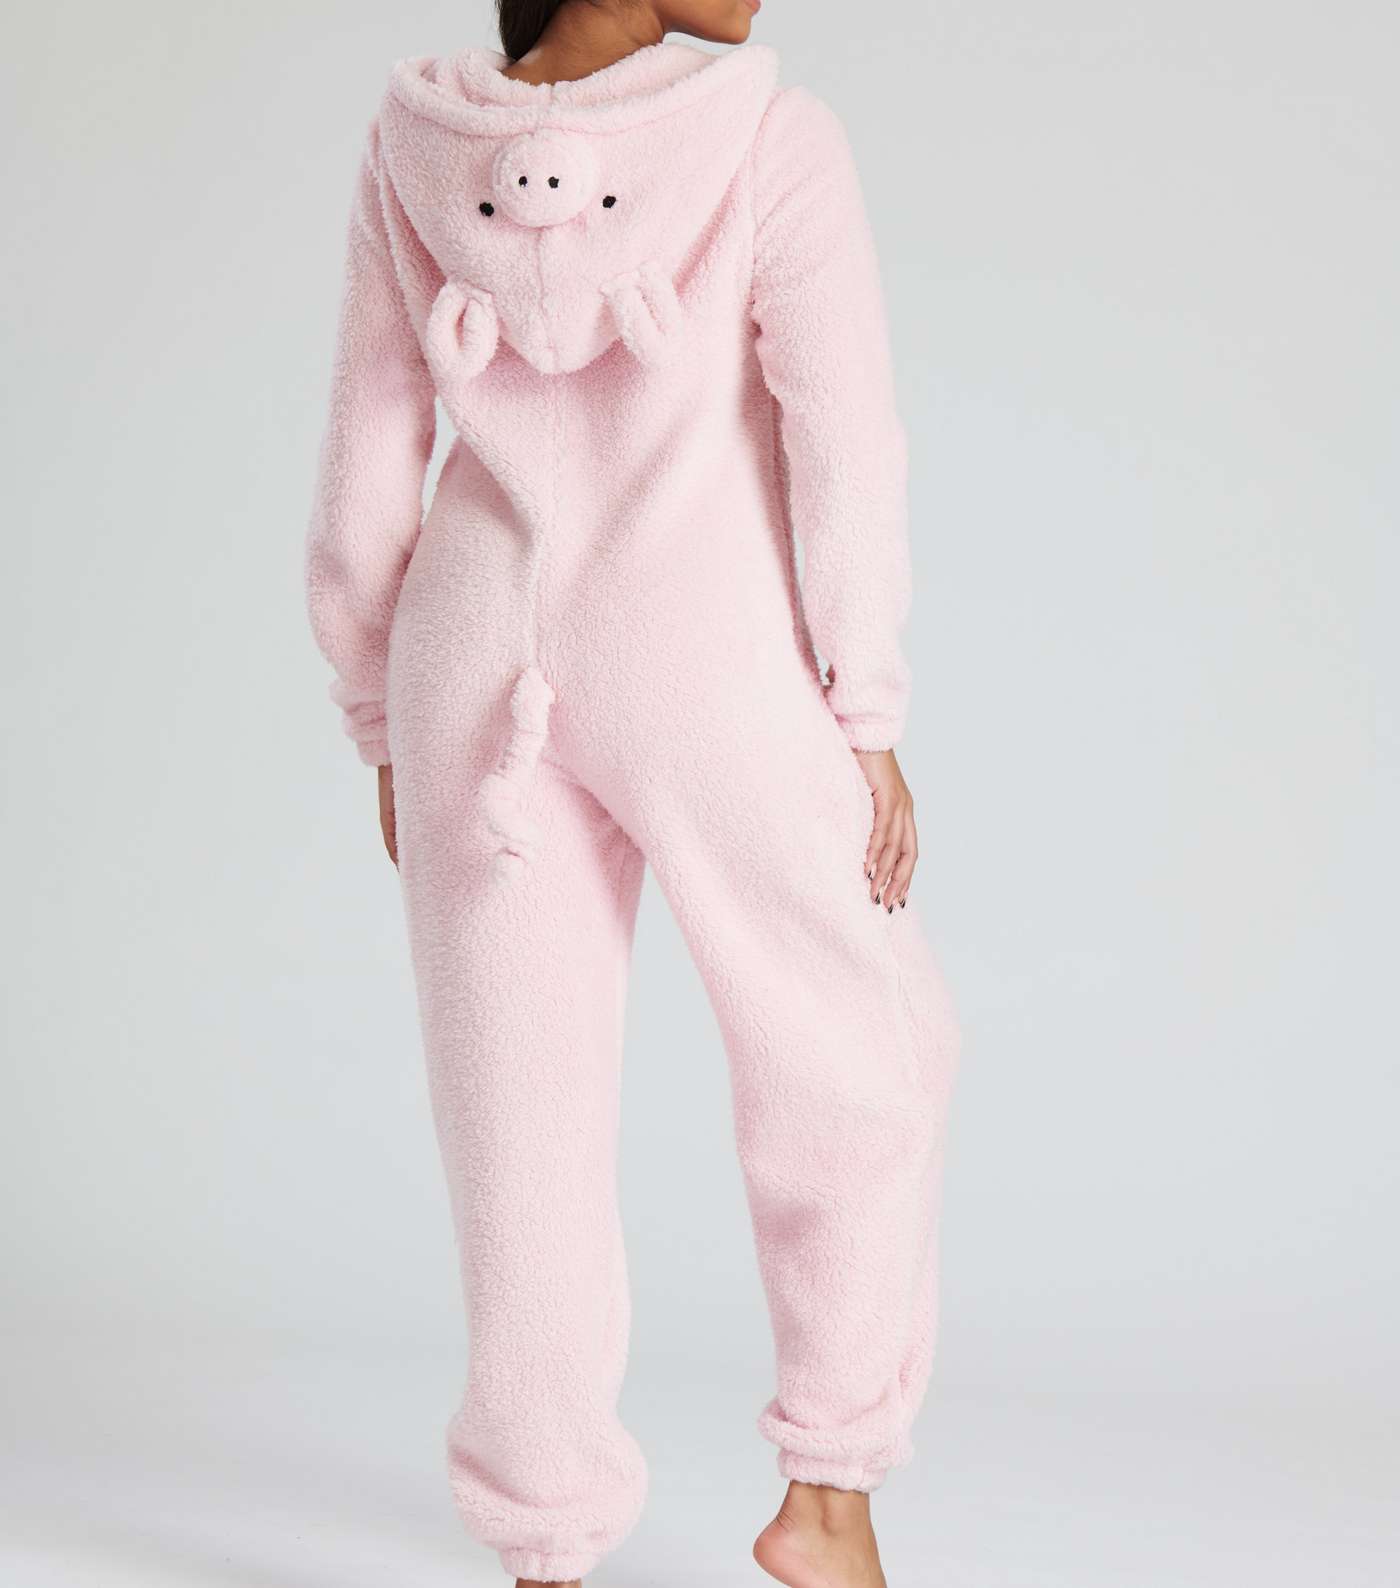 Loungeable Pink Teddy Pig Onesie Image 2